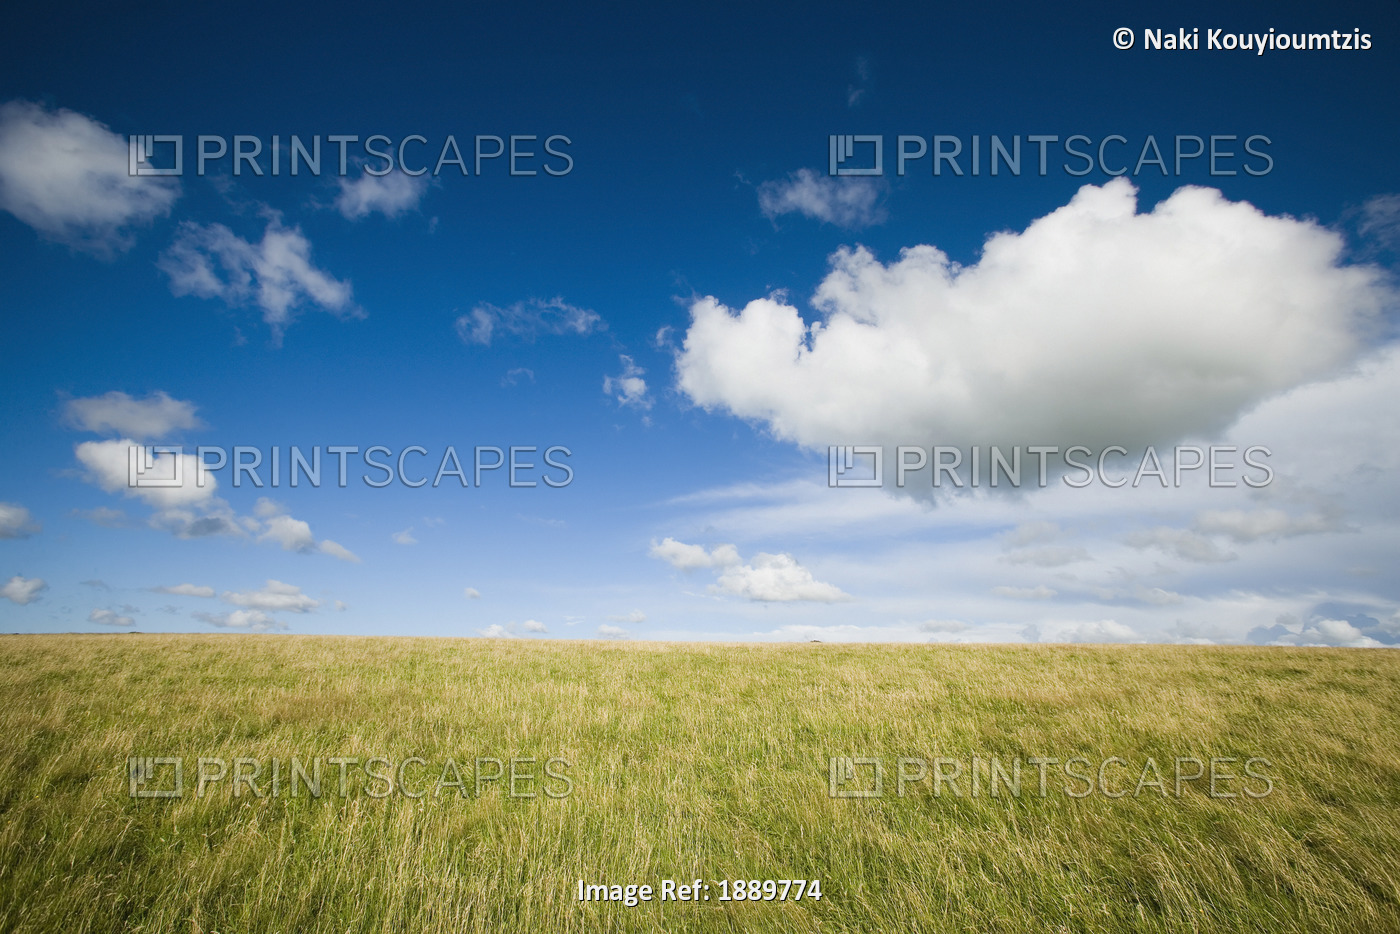 Grassy Field On Hill With Blue Skies And Clouds